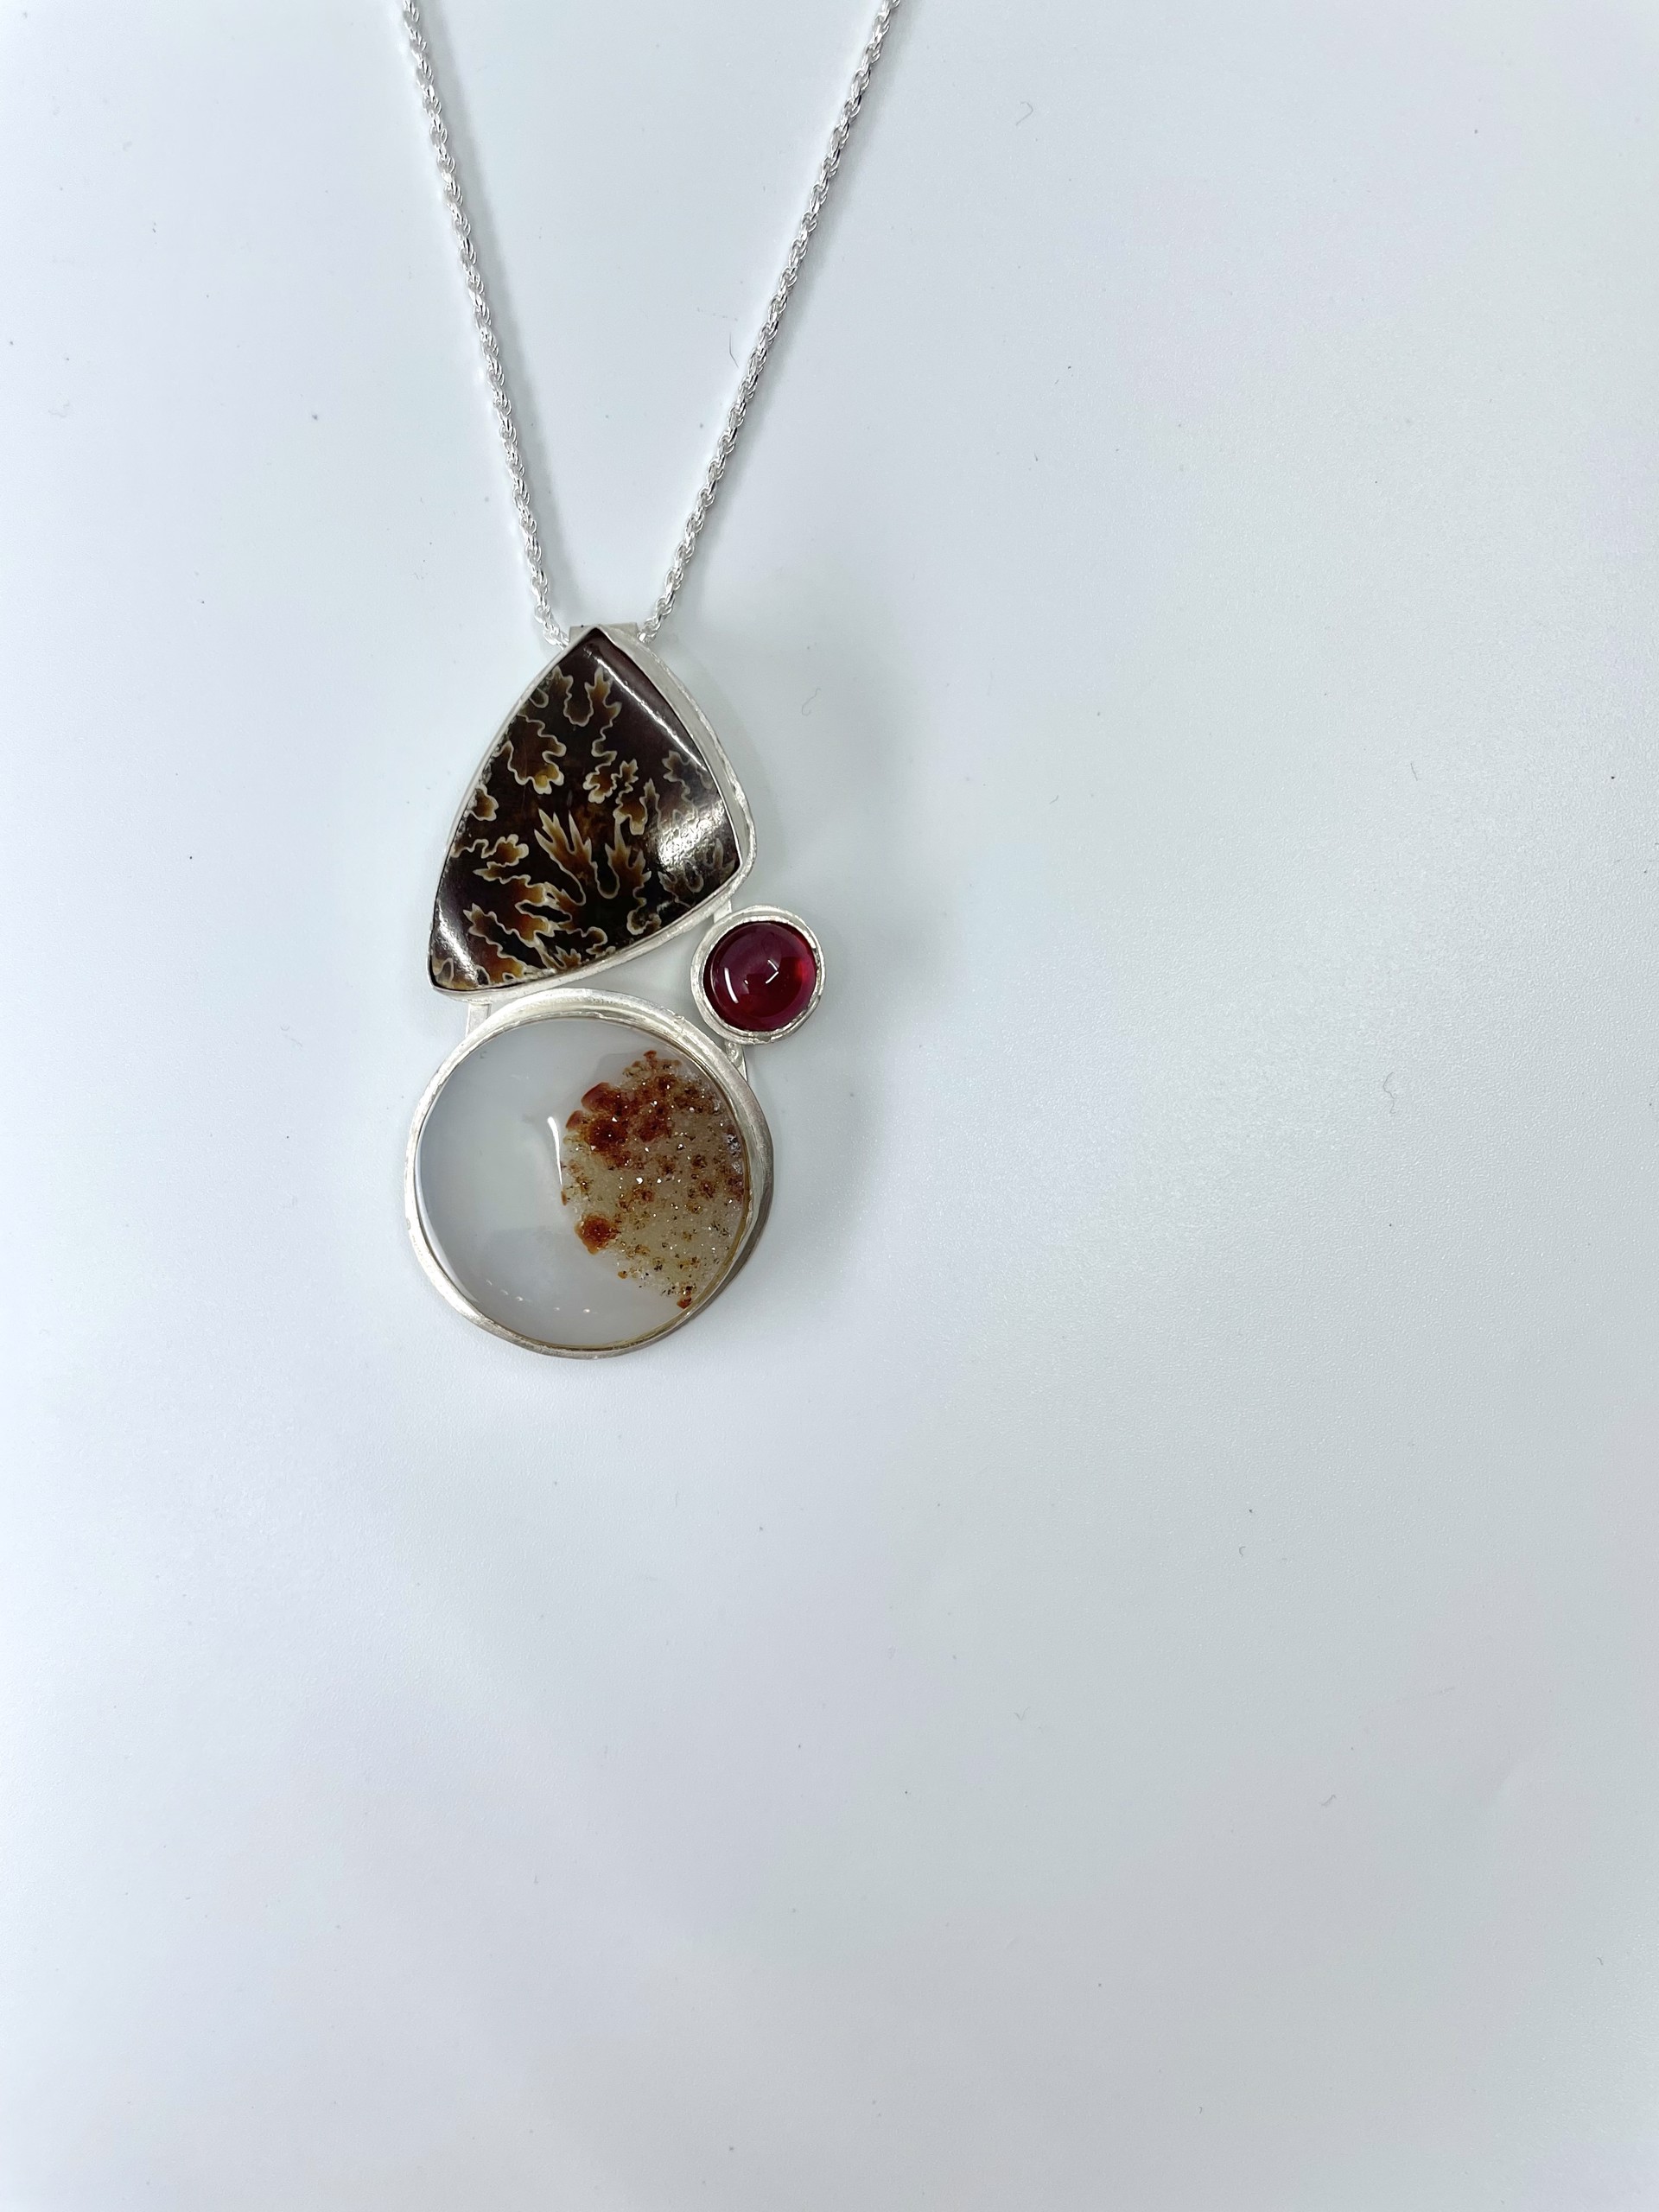 9952 Fossilized Ammonite & Chocolate Brown Ammonite Stones with Ruby Necklace by Suzanne Brown